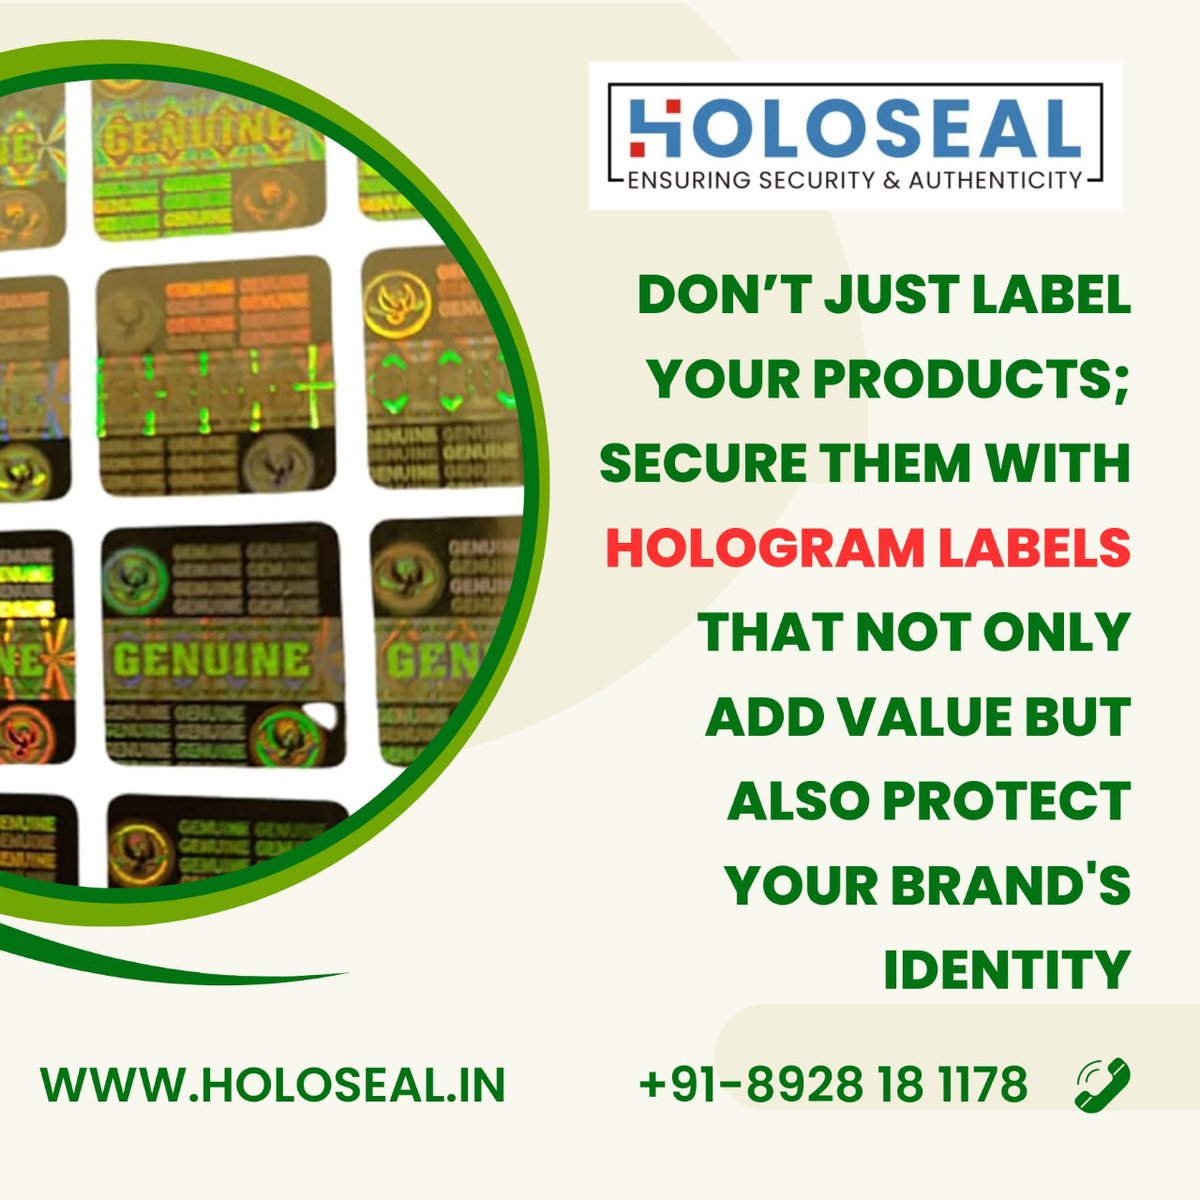 'Don’t just label your products; secure them with hologram labels that not only add value but also protect your brand's identity. #BrandProtection #IdentitySecurity #Holoseal'

i.mtr.cool/zmxgxhtelz